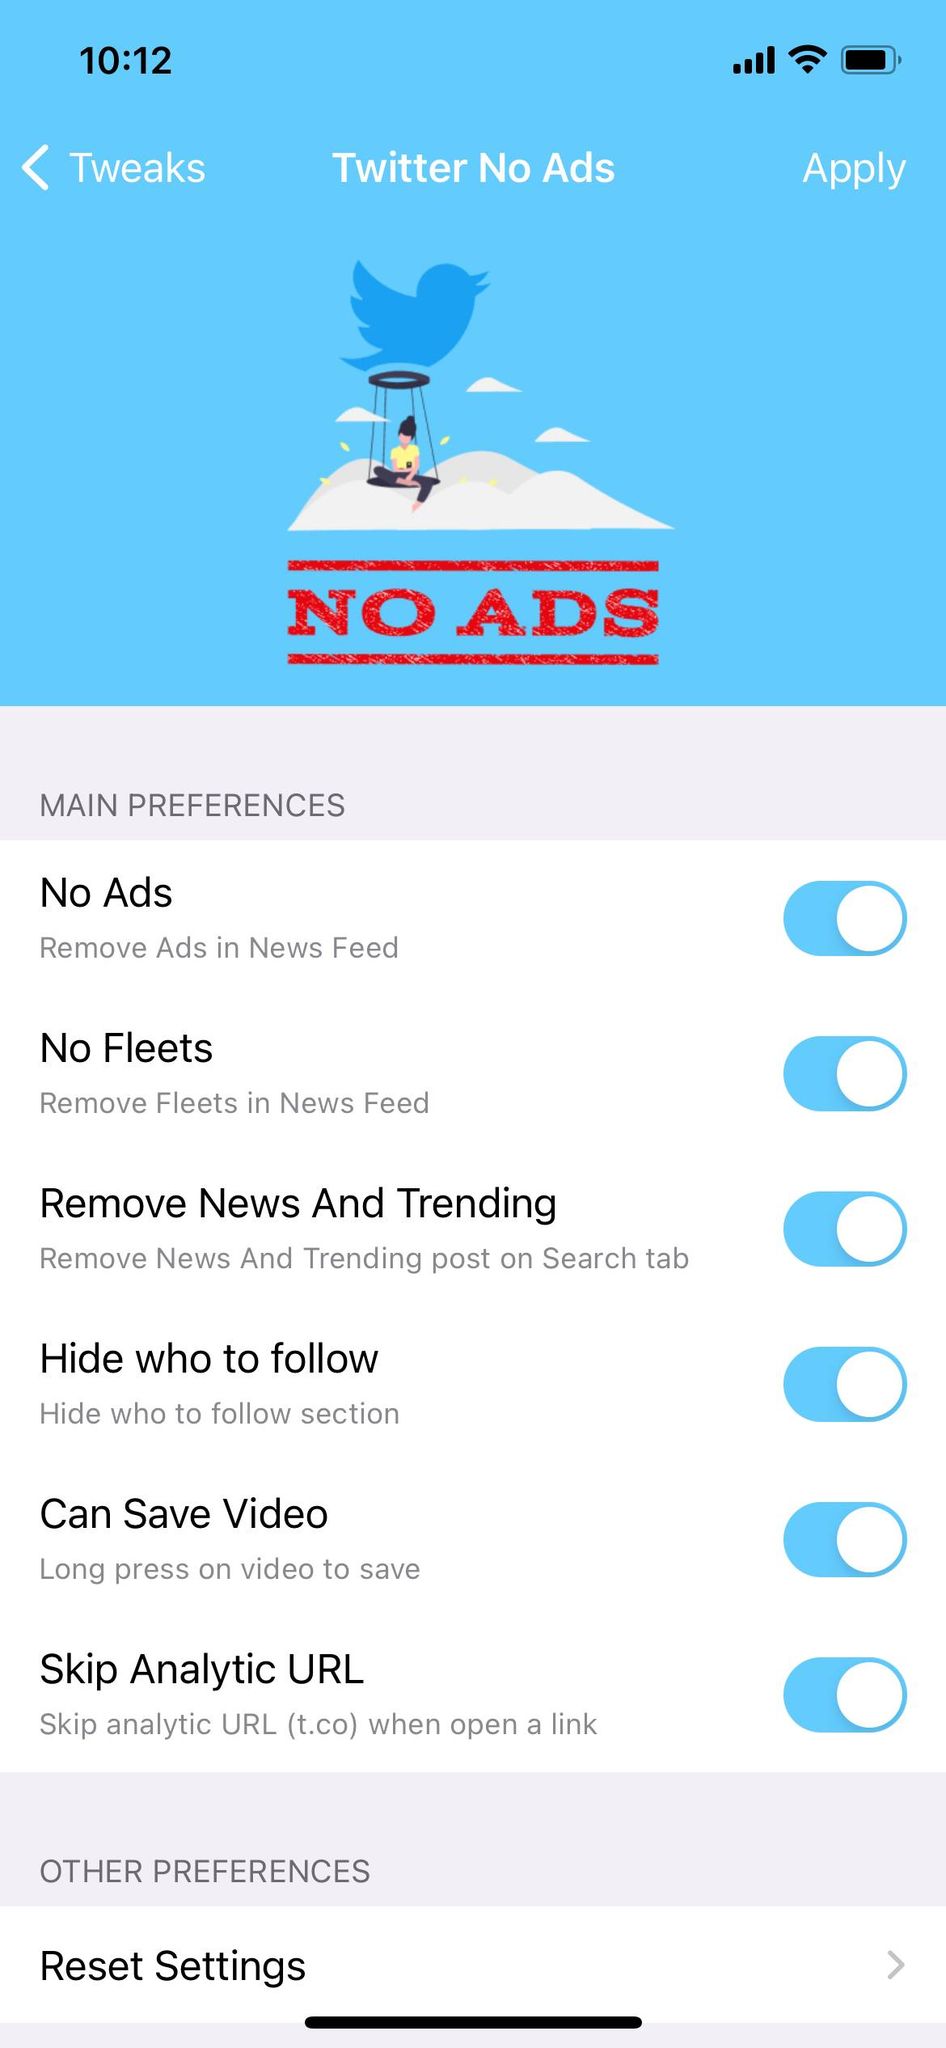 Twitter No Ads Preferences